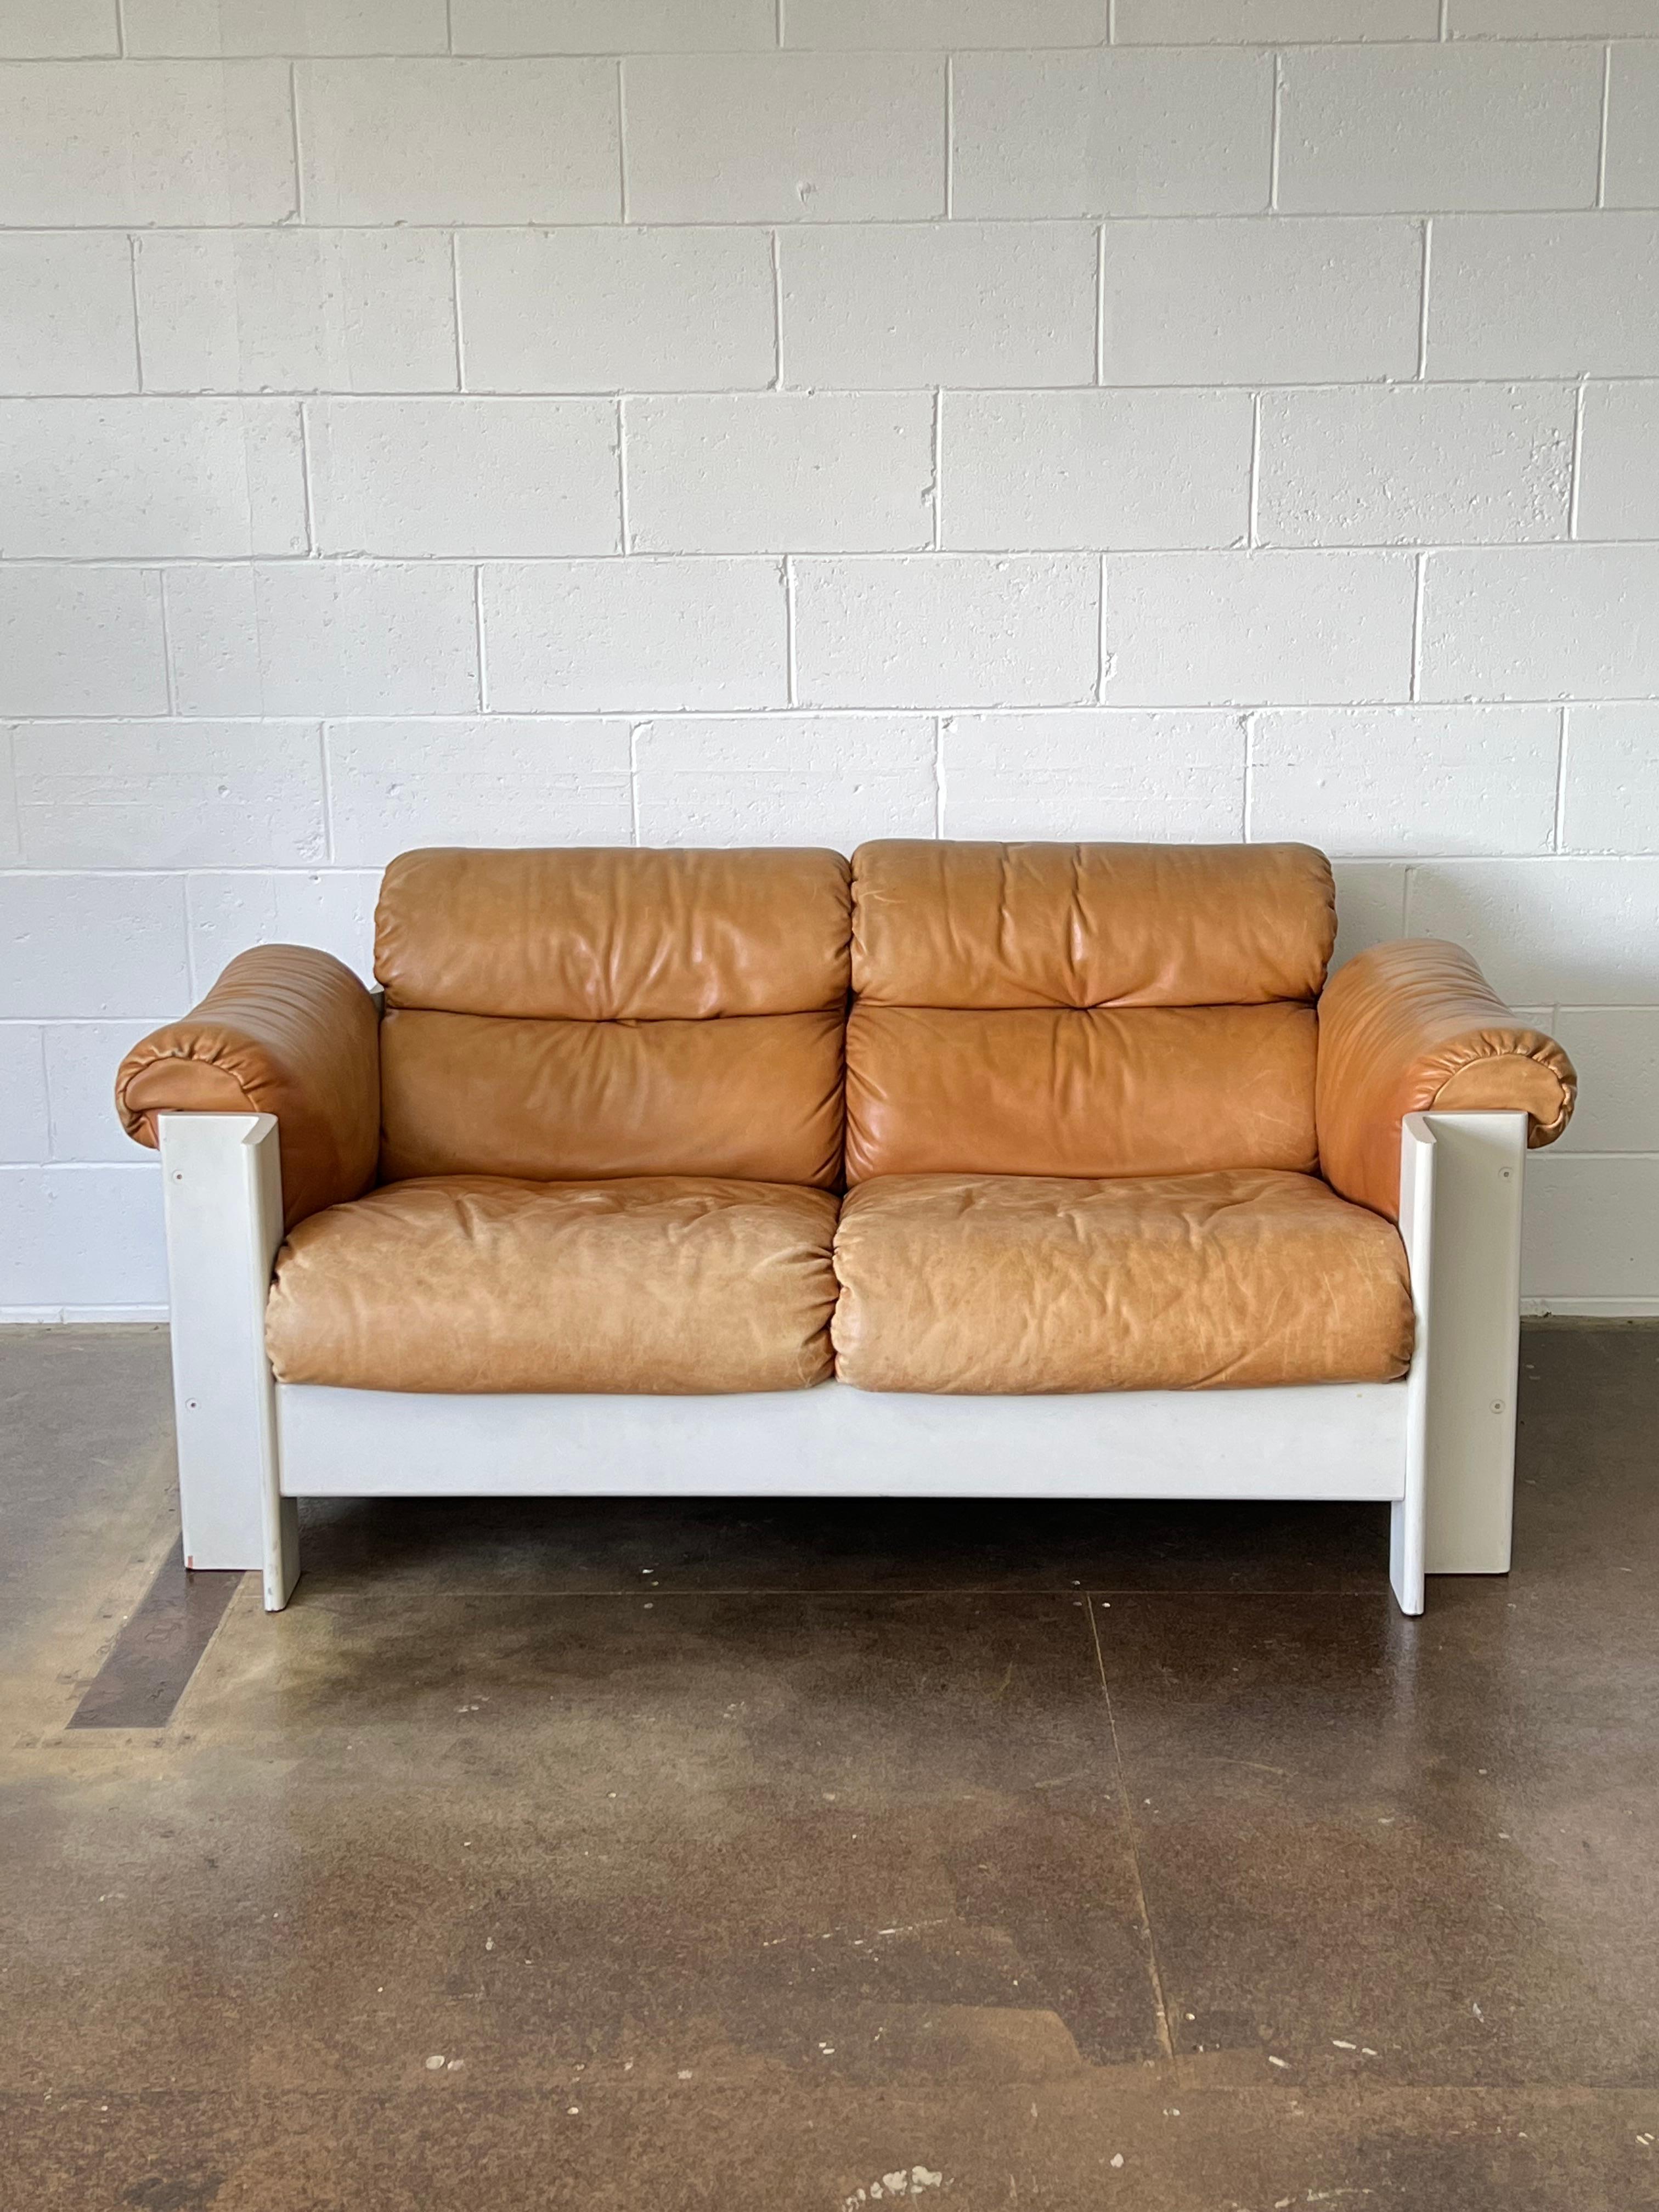 Set of 2 two seater by Giovanni Asti for Poltronova, 1960s.

Wear consistent with age and use, patina consistent with age and use one of the sofa has a bit more of wear.

